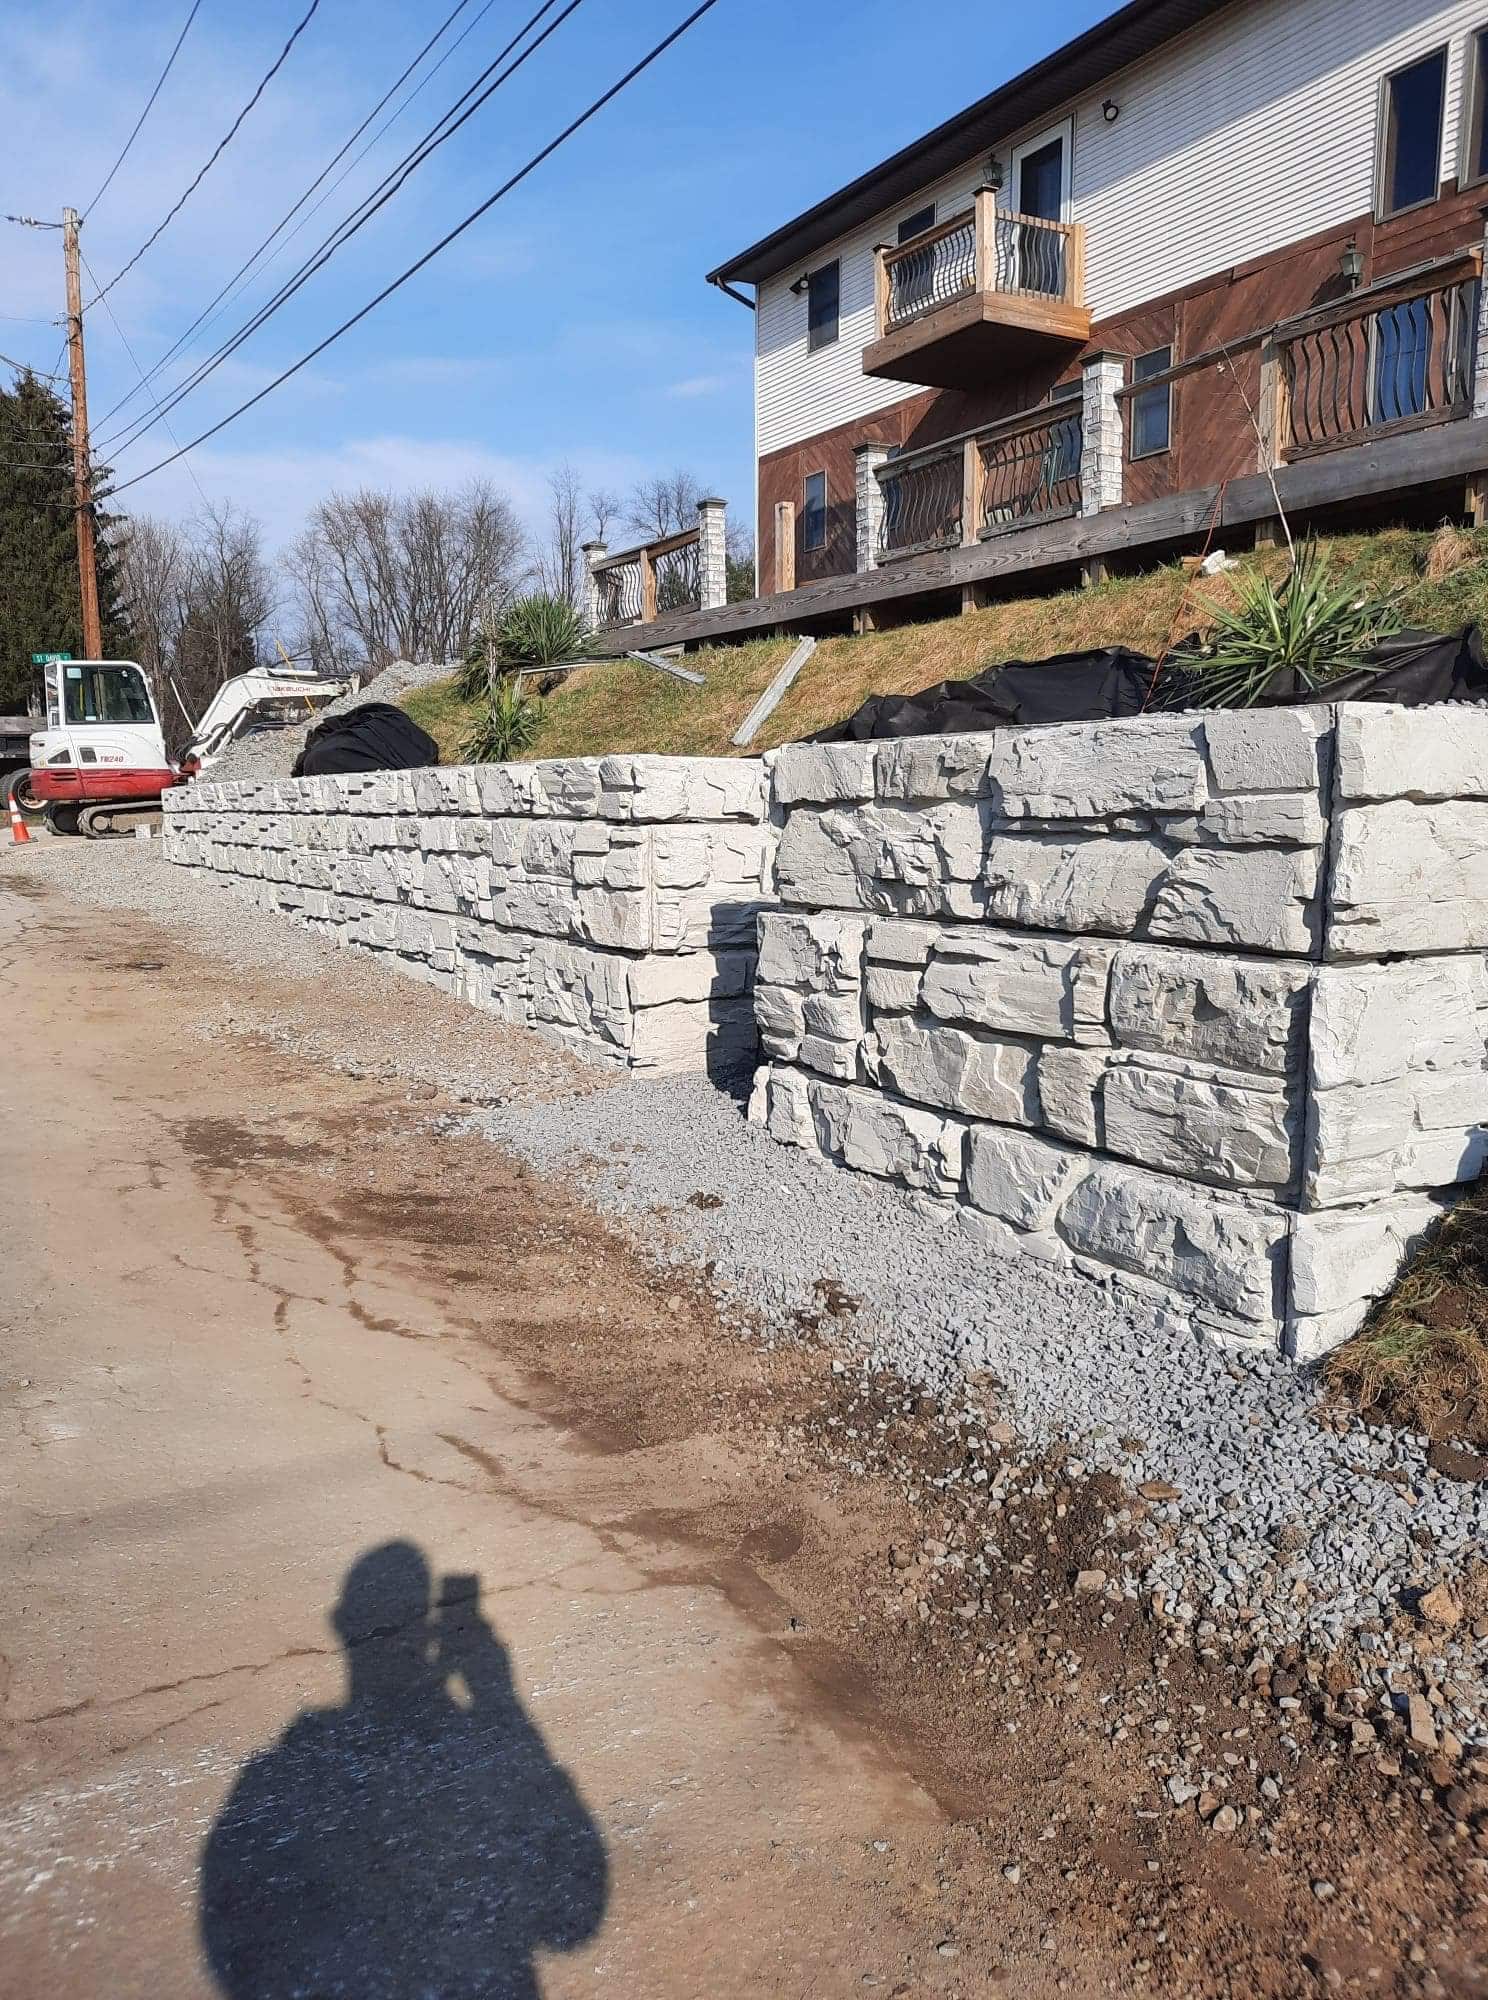 MagnumStone retaining wall blocks for apartment complex.